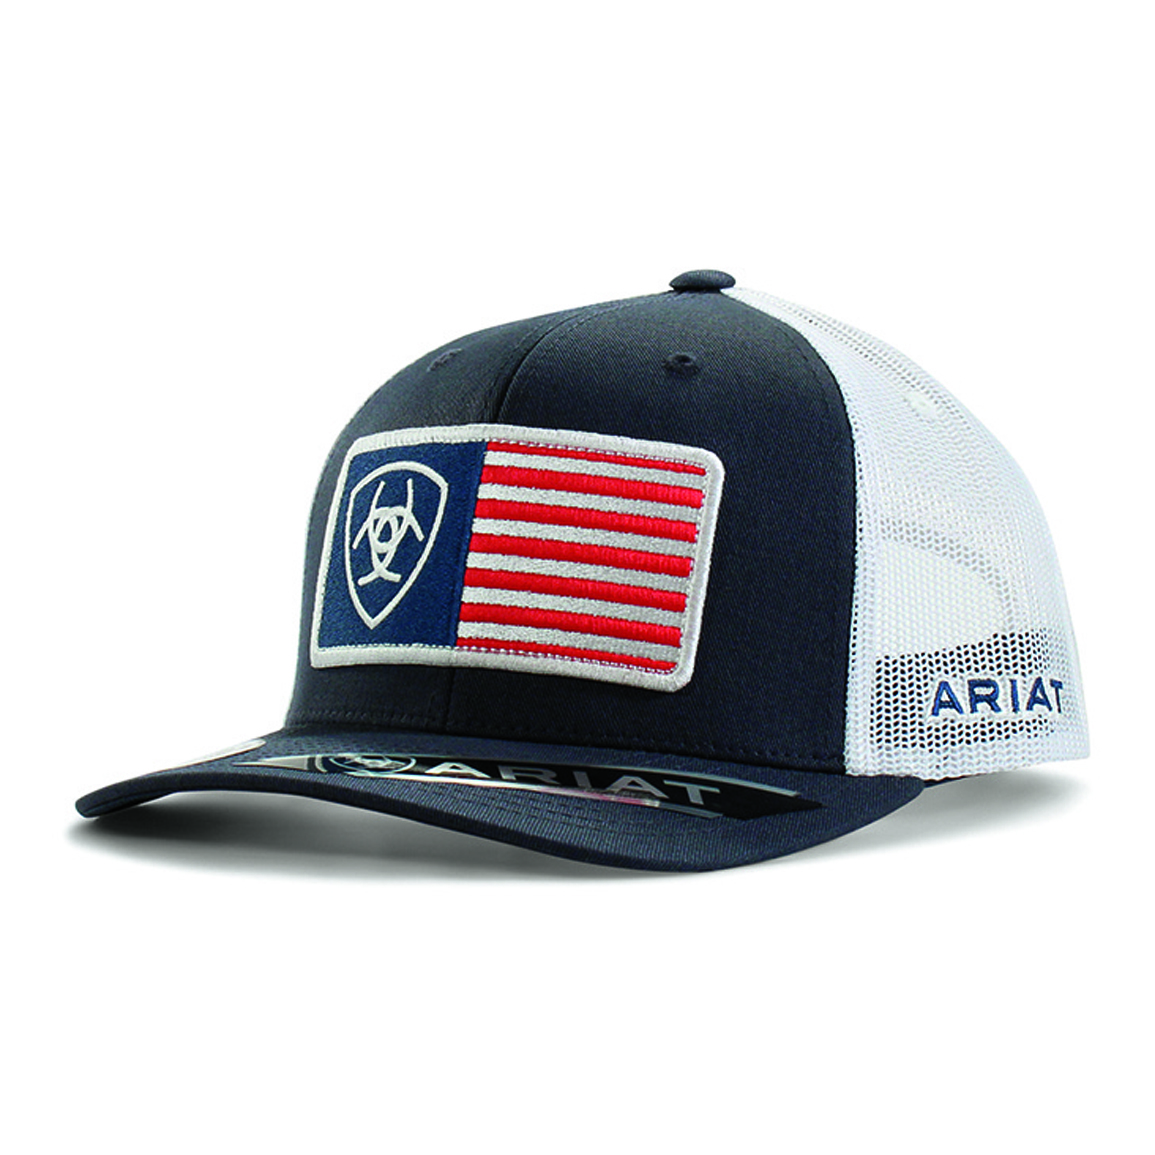 Ariat Mens Flag Patch Unstructured Baseball Cap, Navy